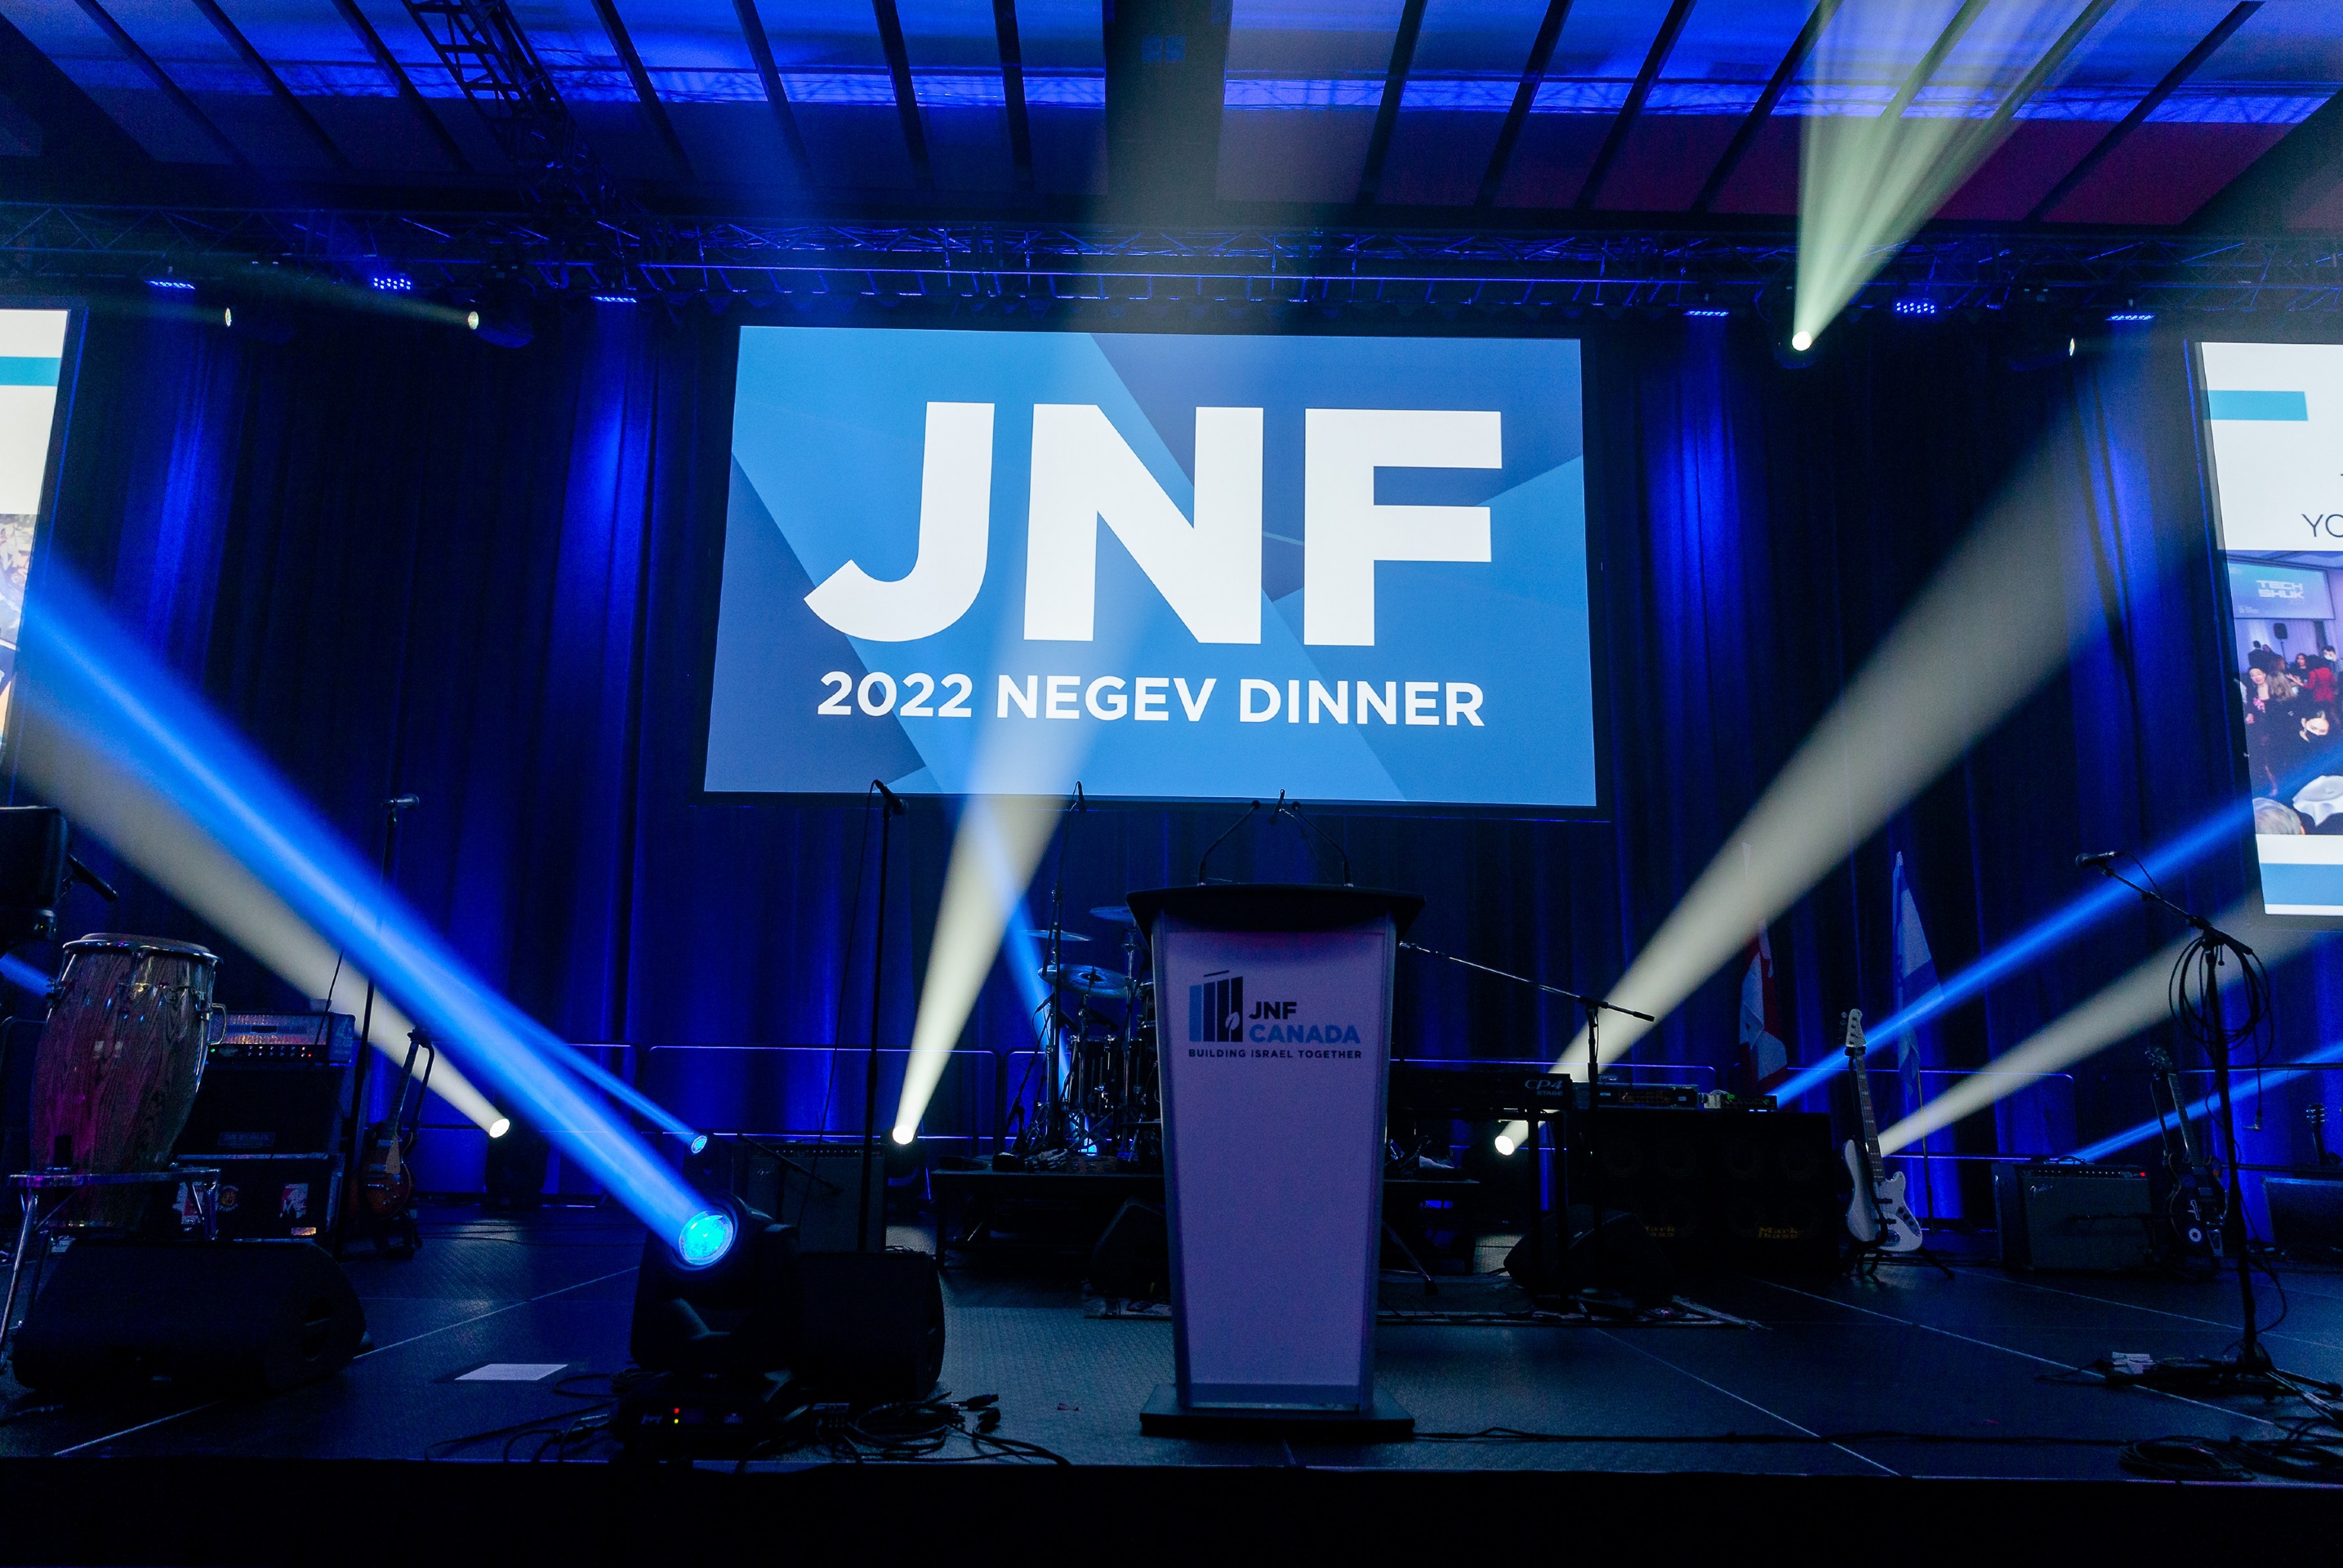 Fonds national juif du Canada | Welcome to the Jewish National Fund Toronto Region’s website. We invite you to become involved in the life altering work of JNF in Israel. We organize events,